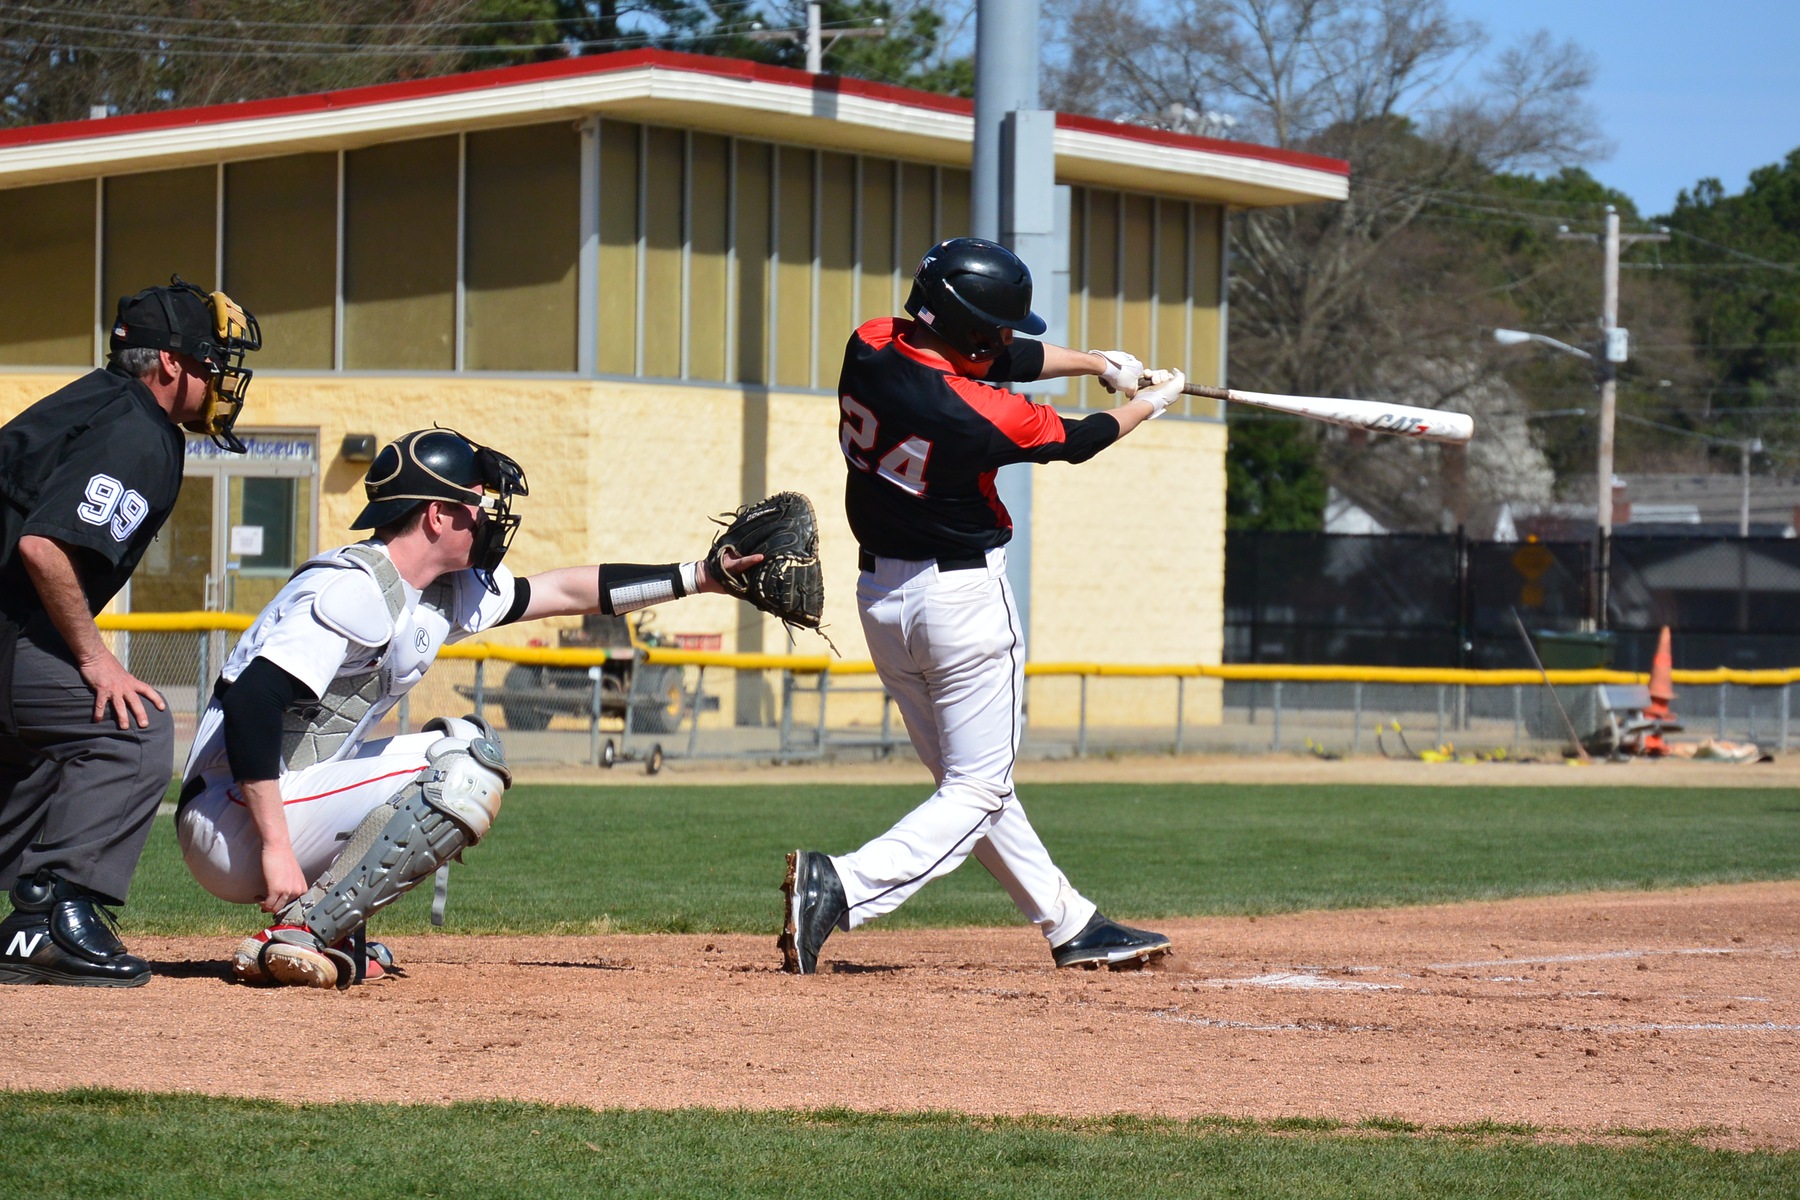 BASEBALL SWEPT BY WILDCATS